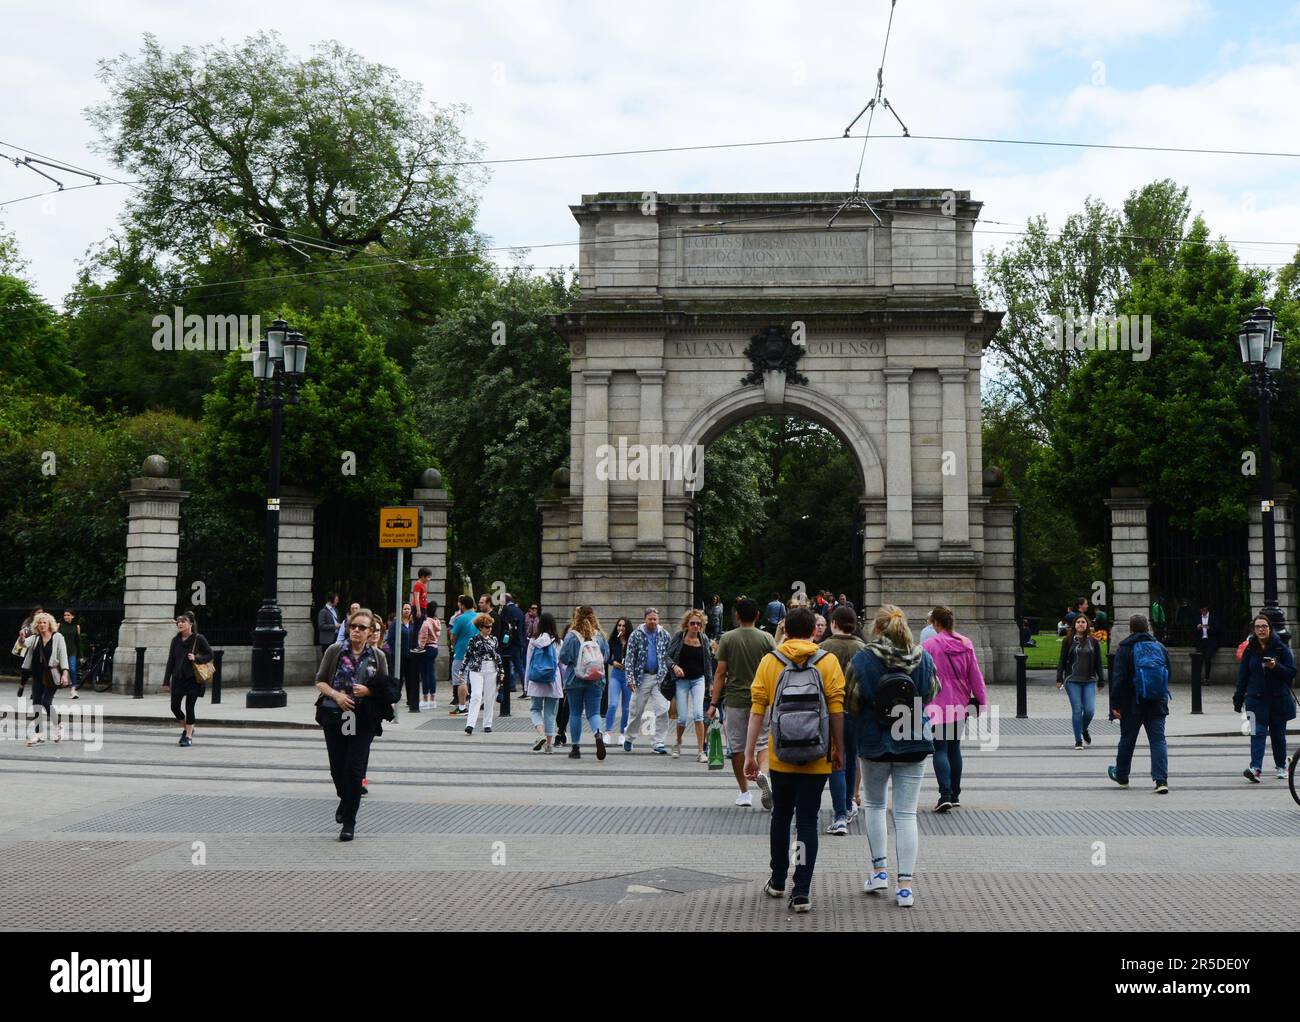 Fusilier's Arch am Eingang des St. Stephen's Green Parks in Dublin, Irleland. Stockfoto